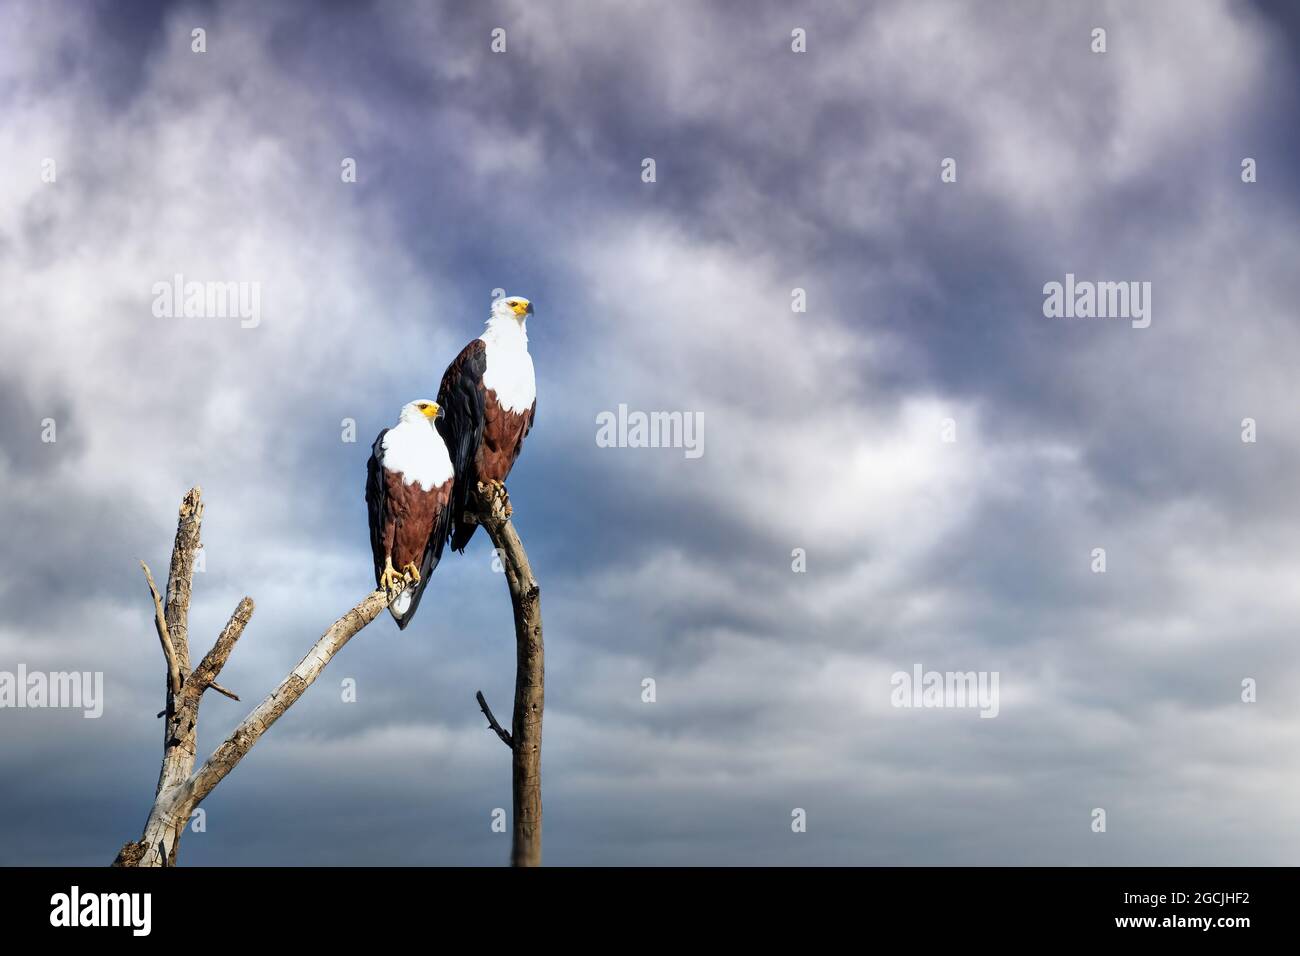 African Fish Eagles, breeding pair, perched on a dead tree against stormy sky, Lake Naivasha, Kenya. A freshwater bird found throughout sub-Saharan Af Stock Photo